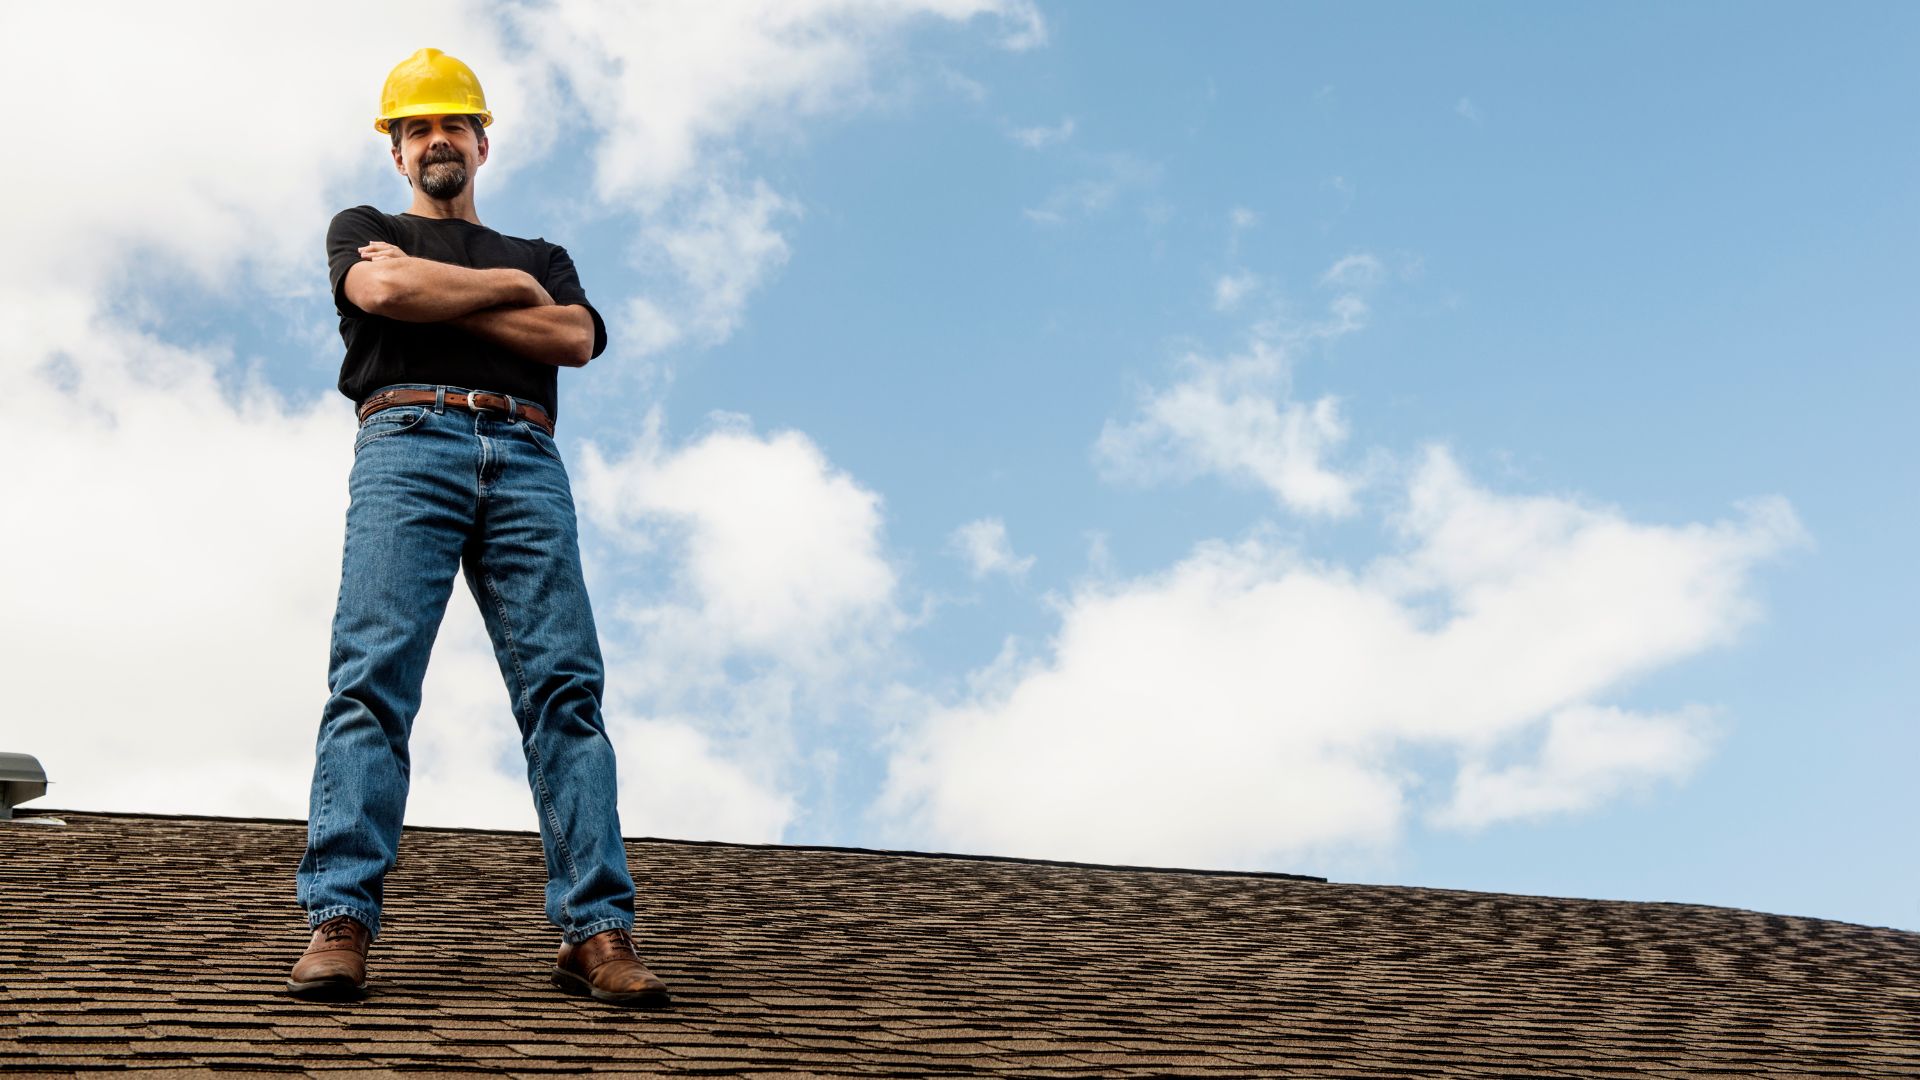 A roofer stands on a newly installed roof